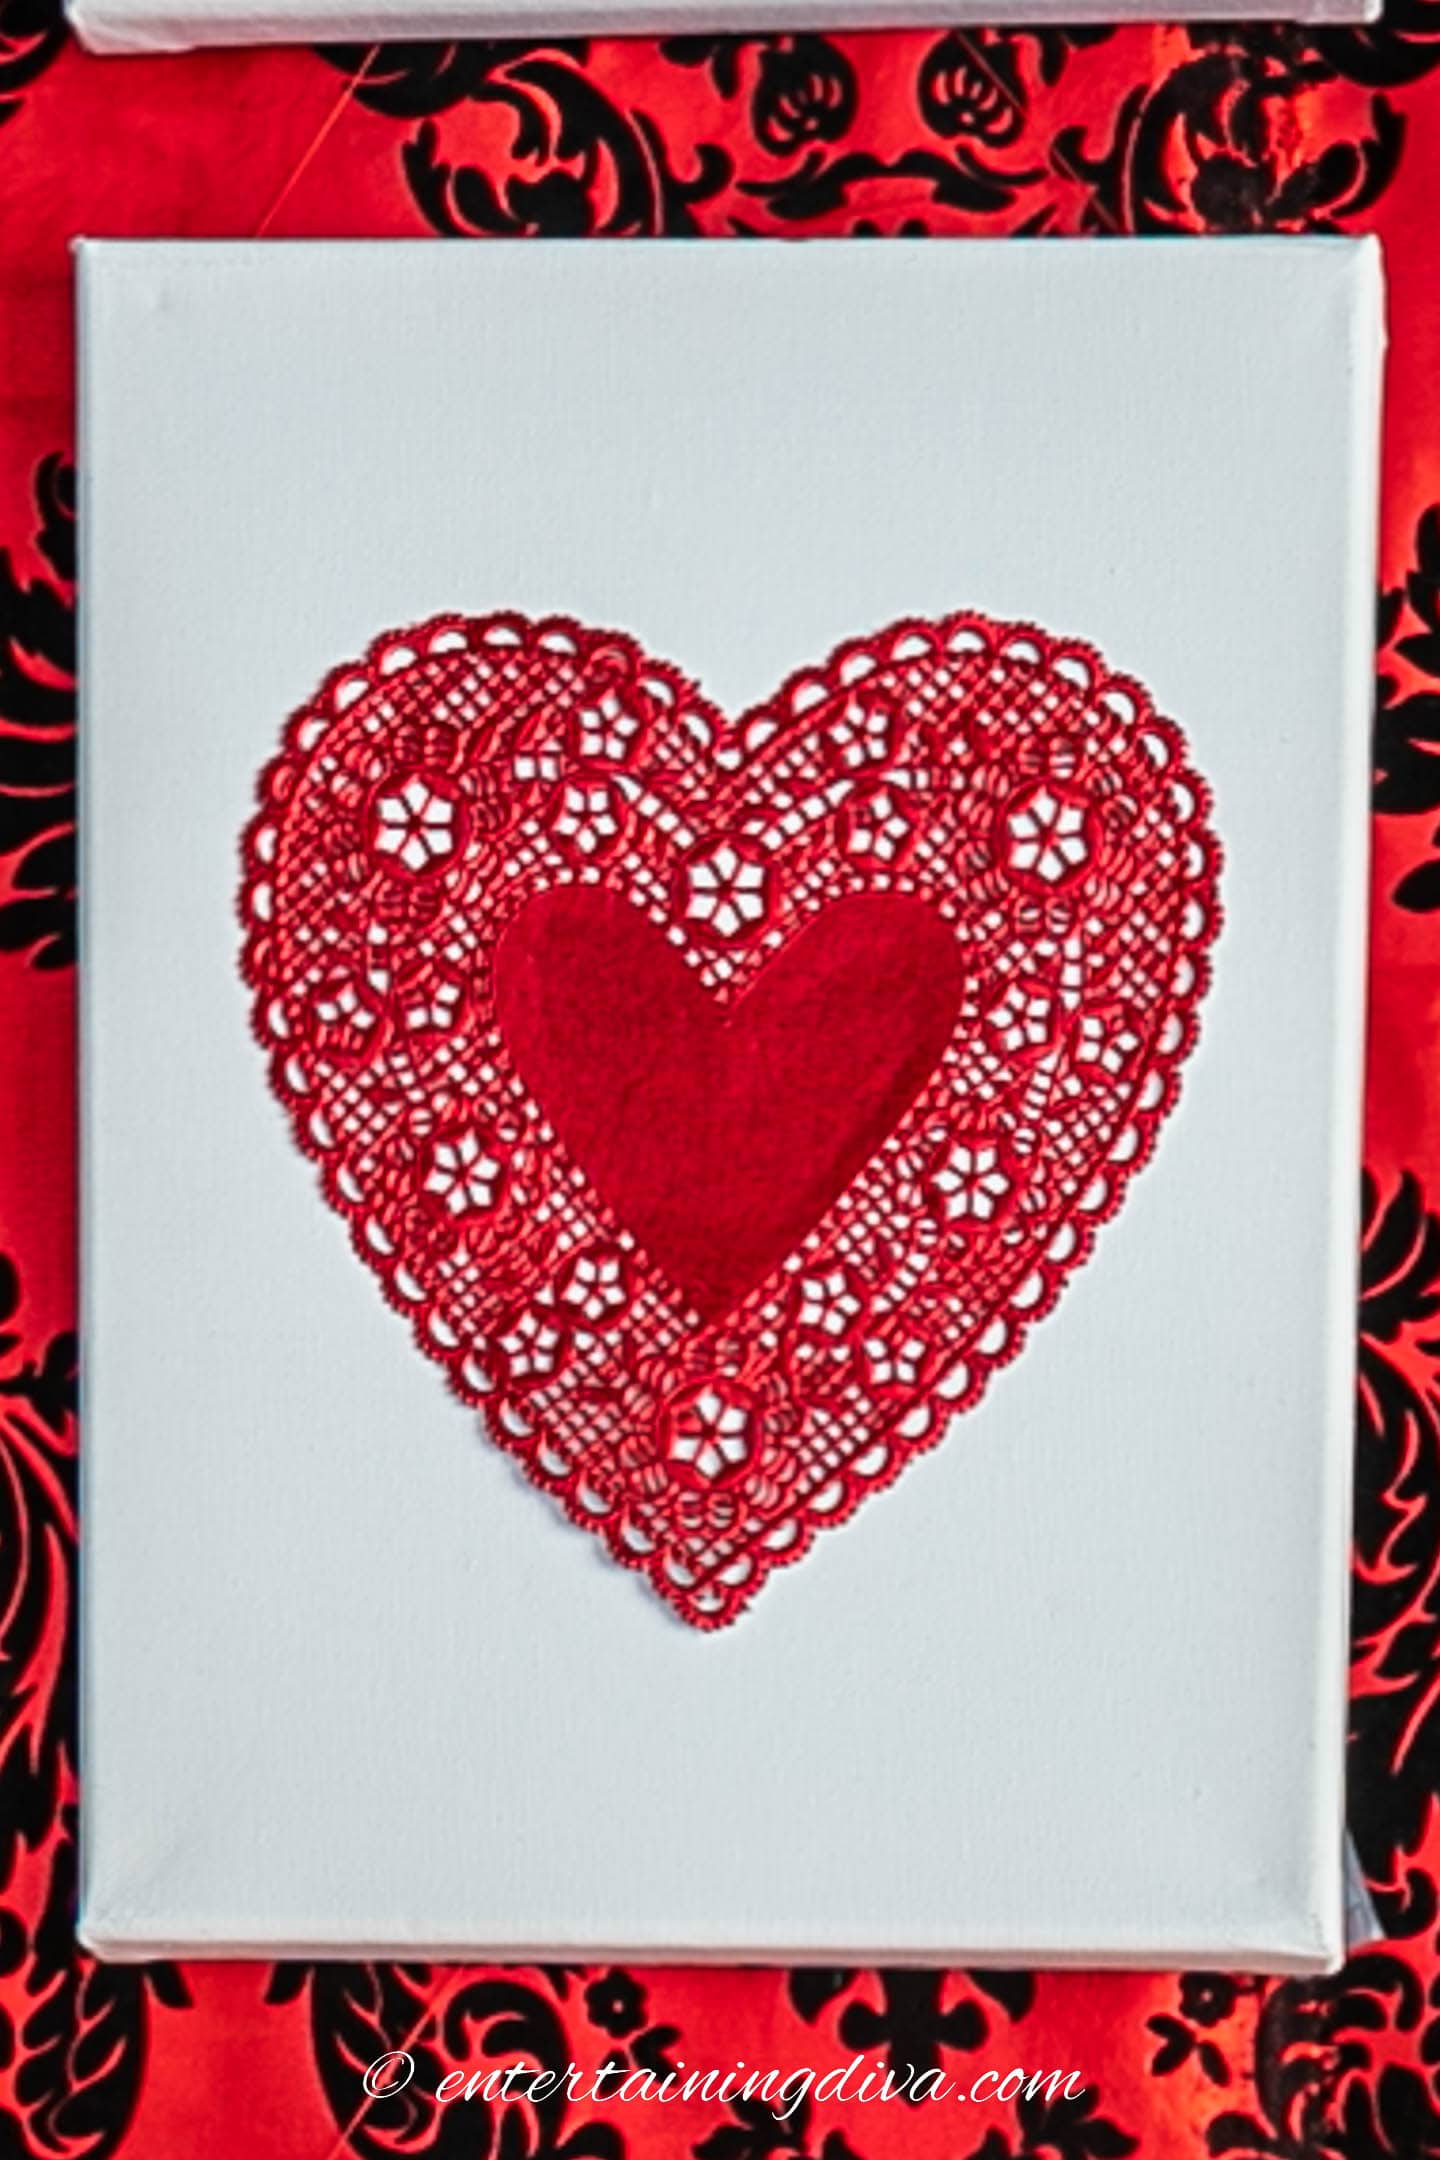 Red doily heart on a white canvas background